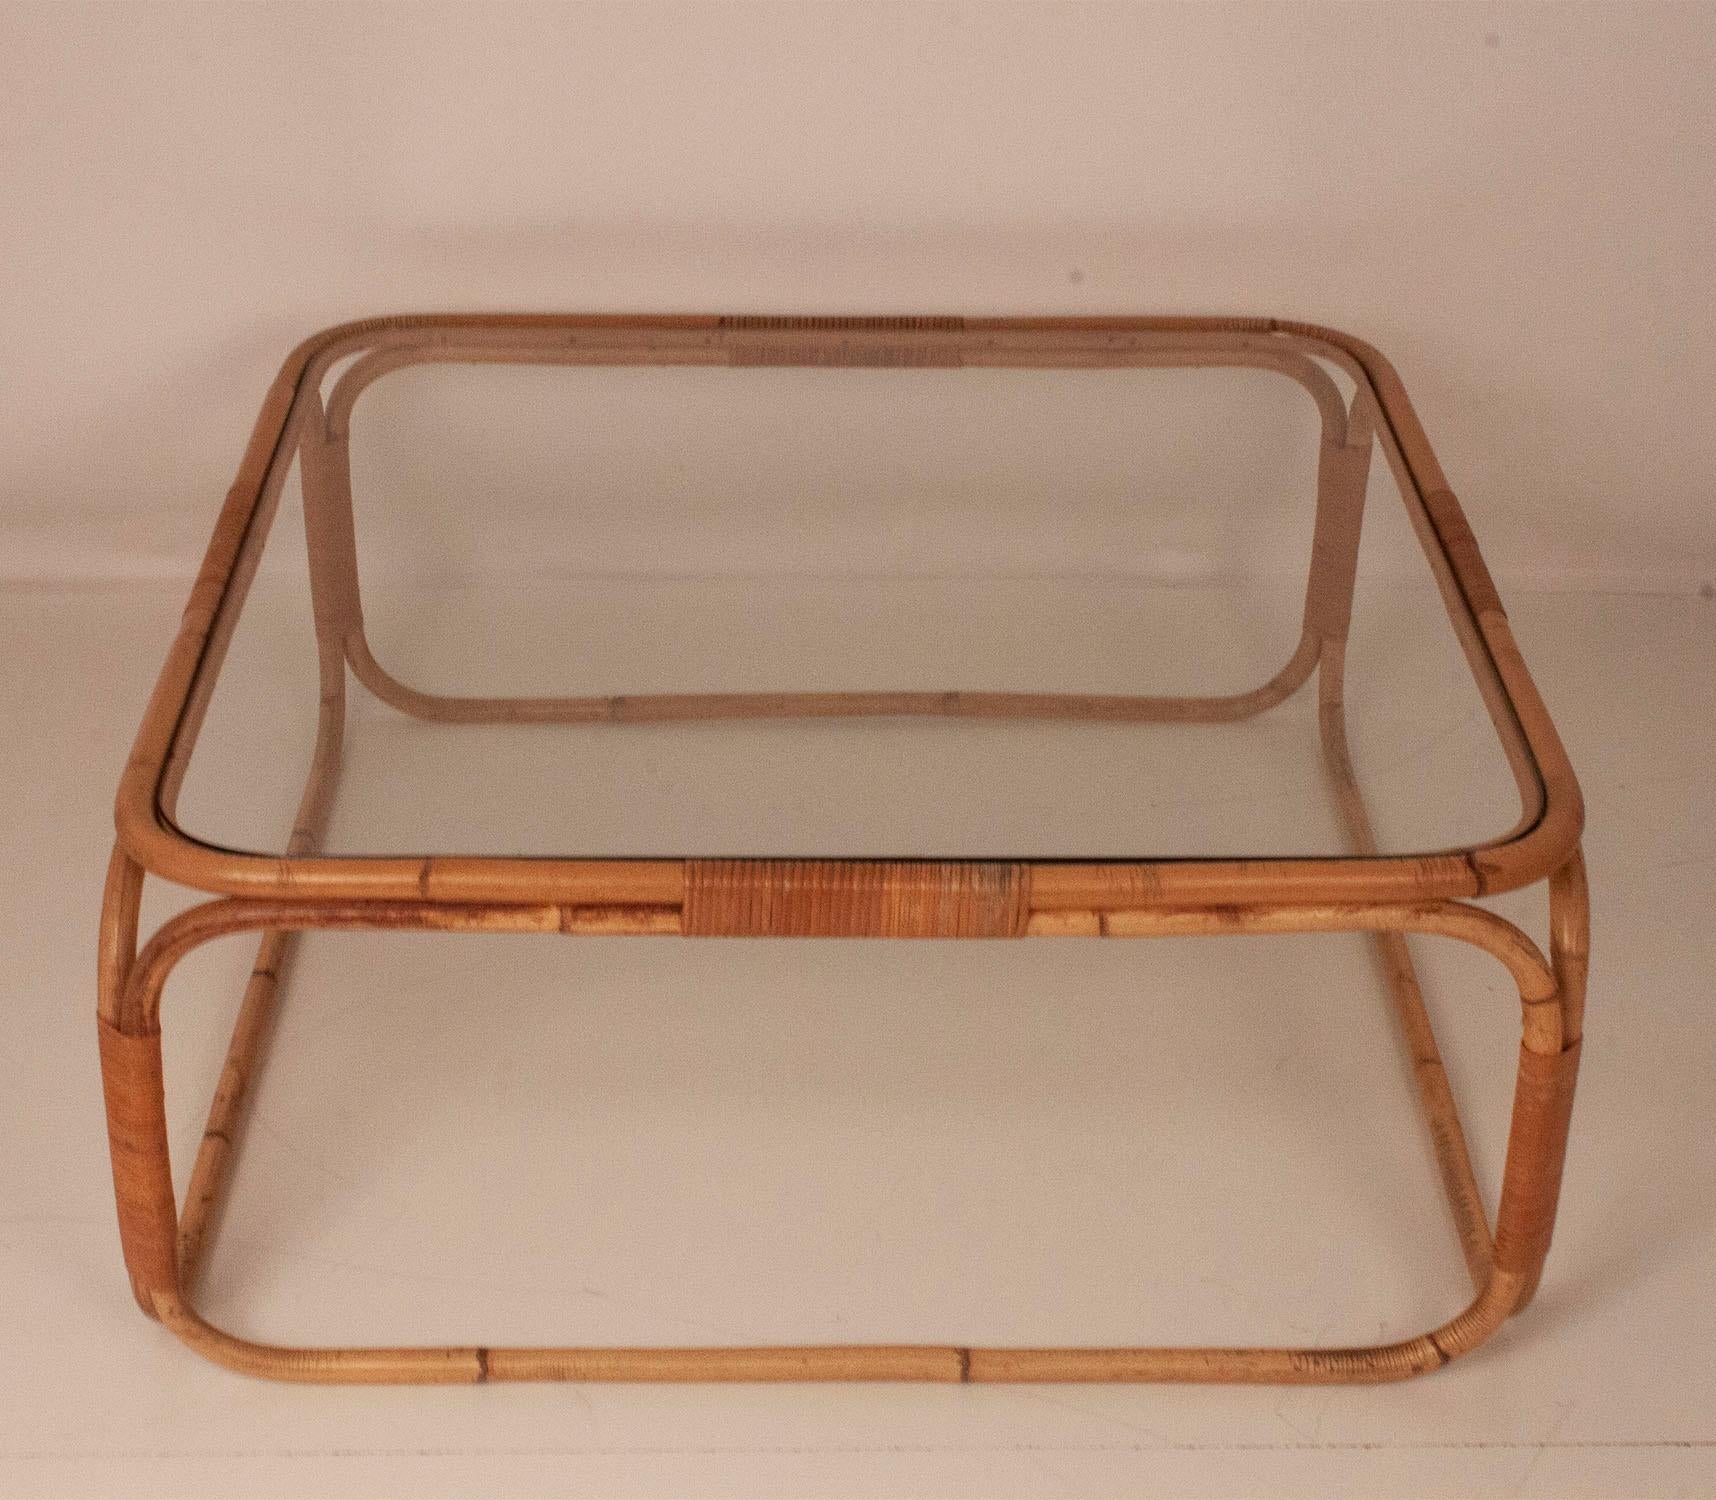 Square coffee table designed by Miguel Milá in bamboo and glass, 1970s.
Miguel Milá Sagnier or, in Catalan, Miquel Milà i Sagnier (Barcelona, ??1931) is a Spanish industrial and interior designer. He is one of the few designers of the first